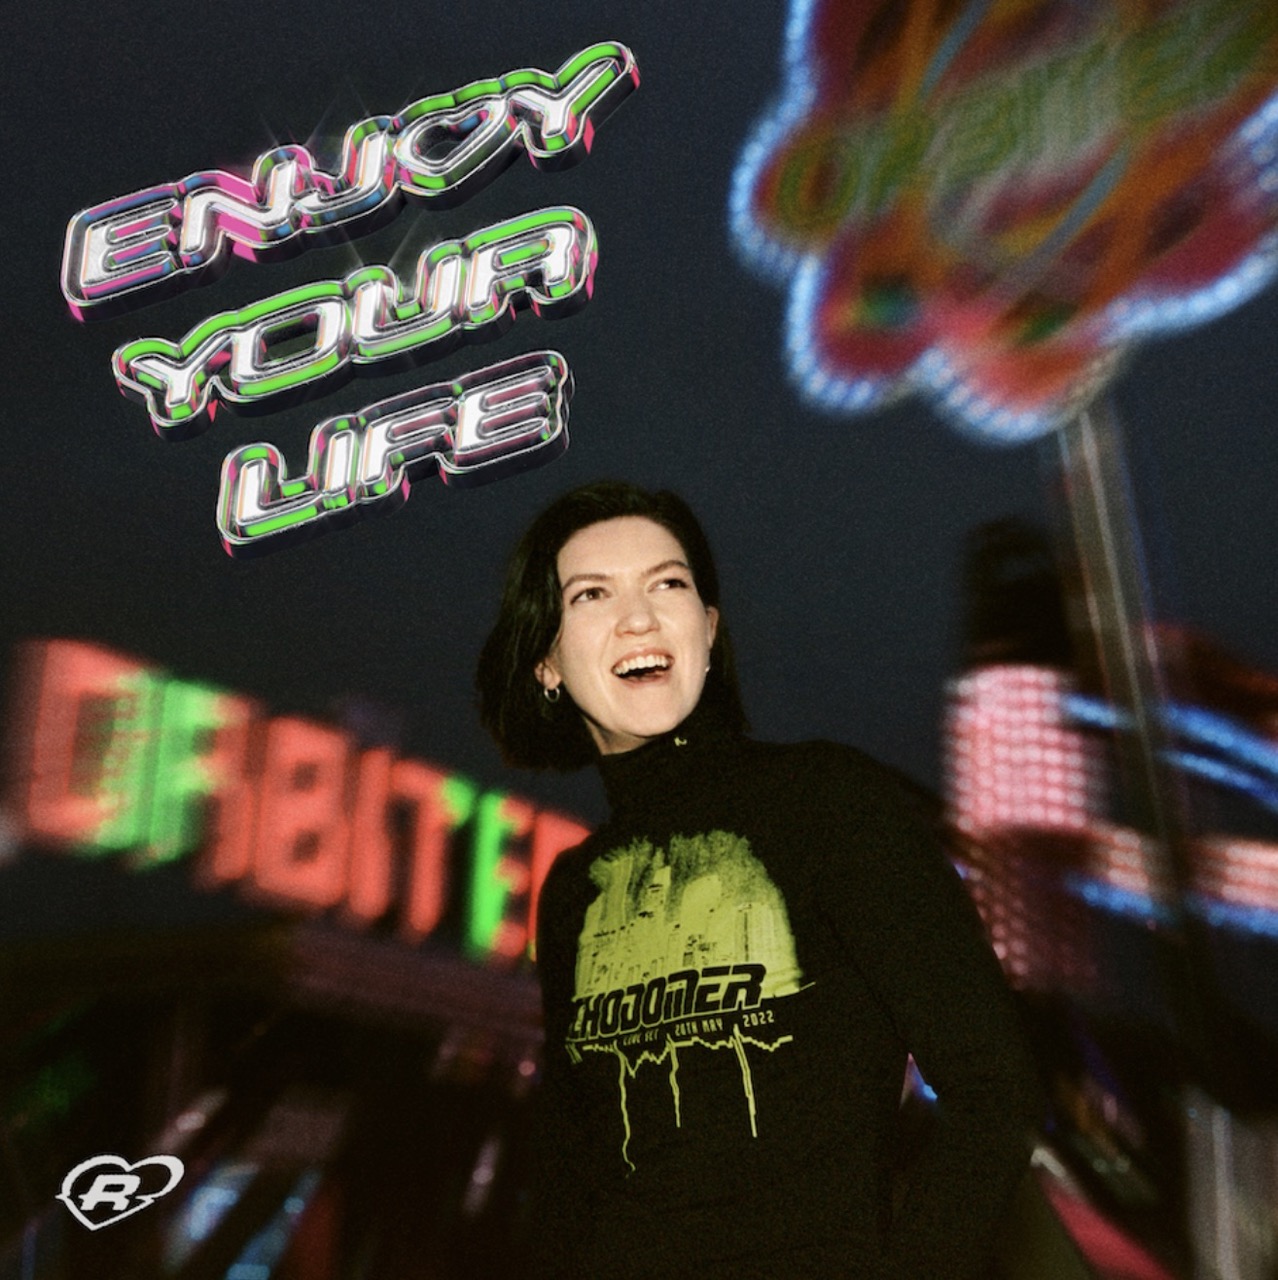 Romy releases the song Enjoy Your Life